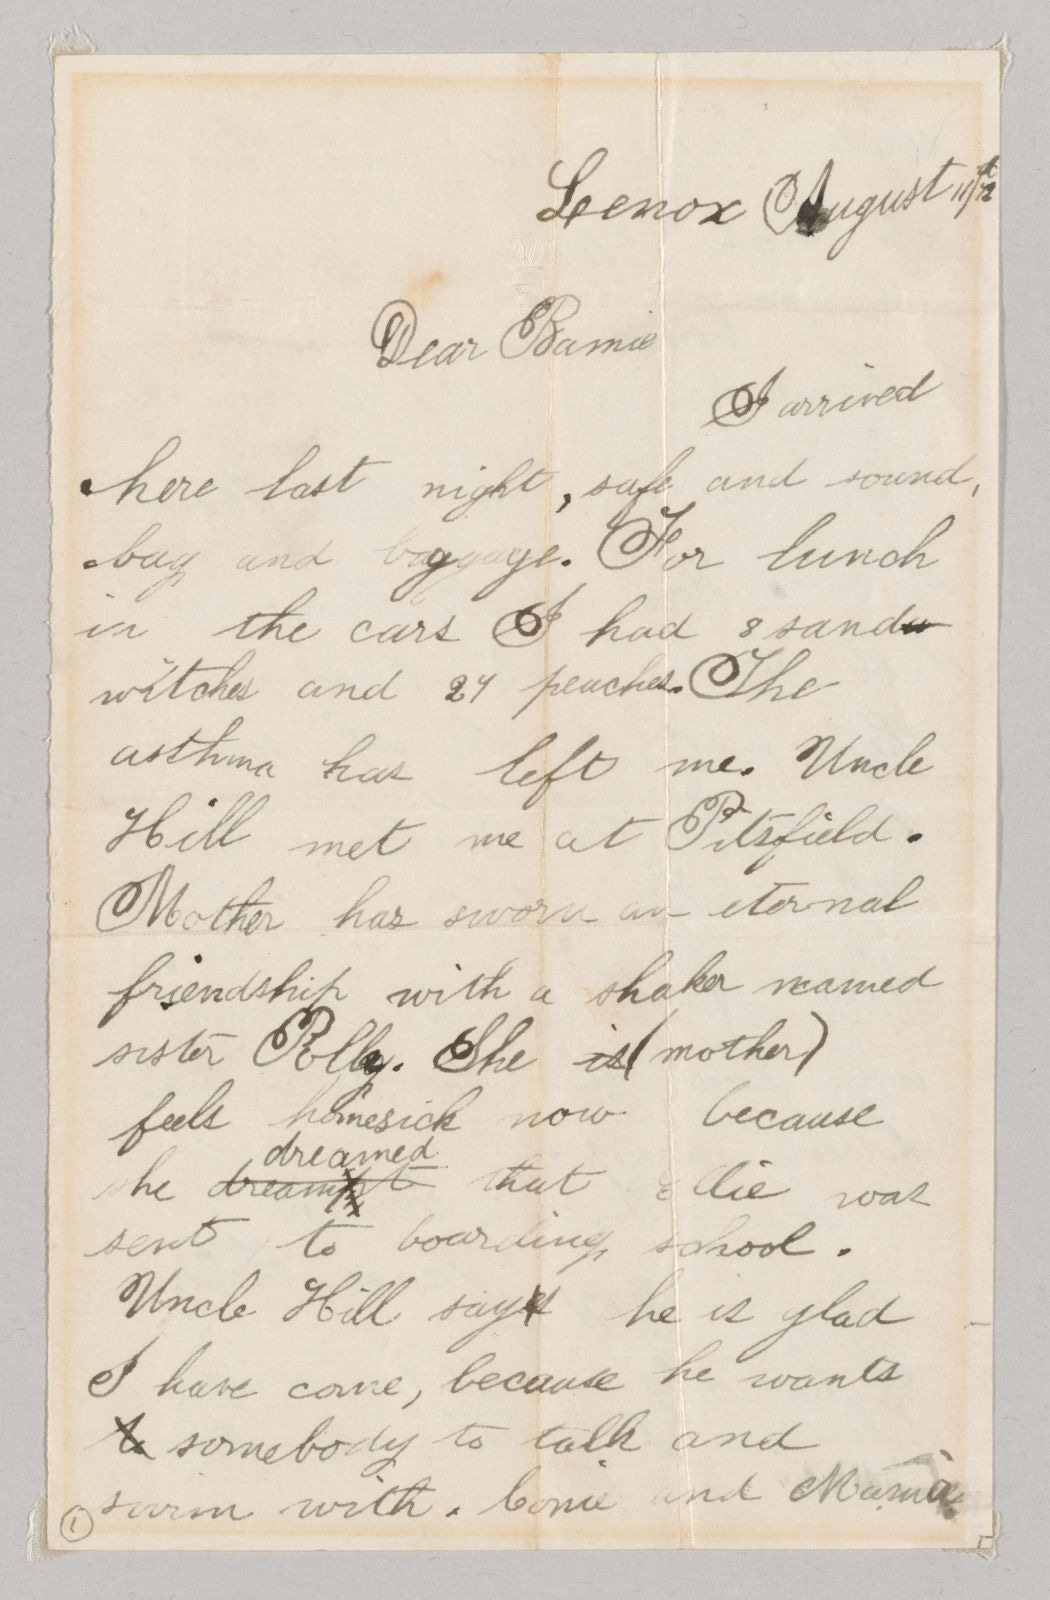 A letter from Theodore Roosevelt to his sister Anna